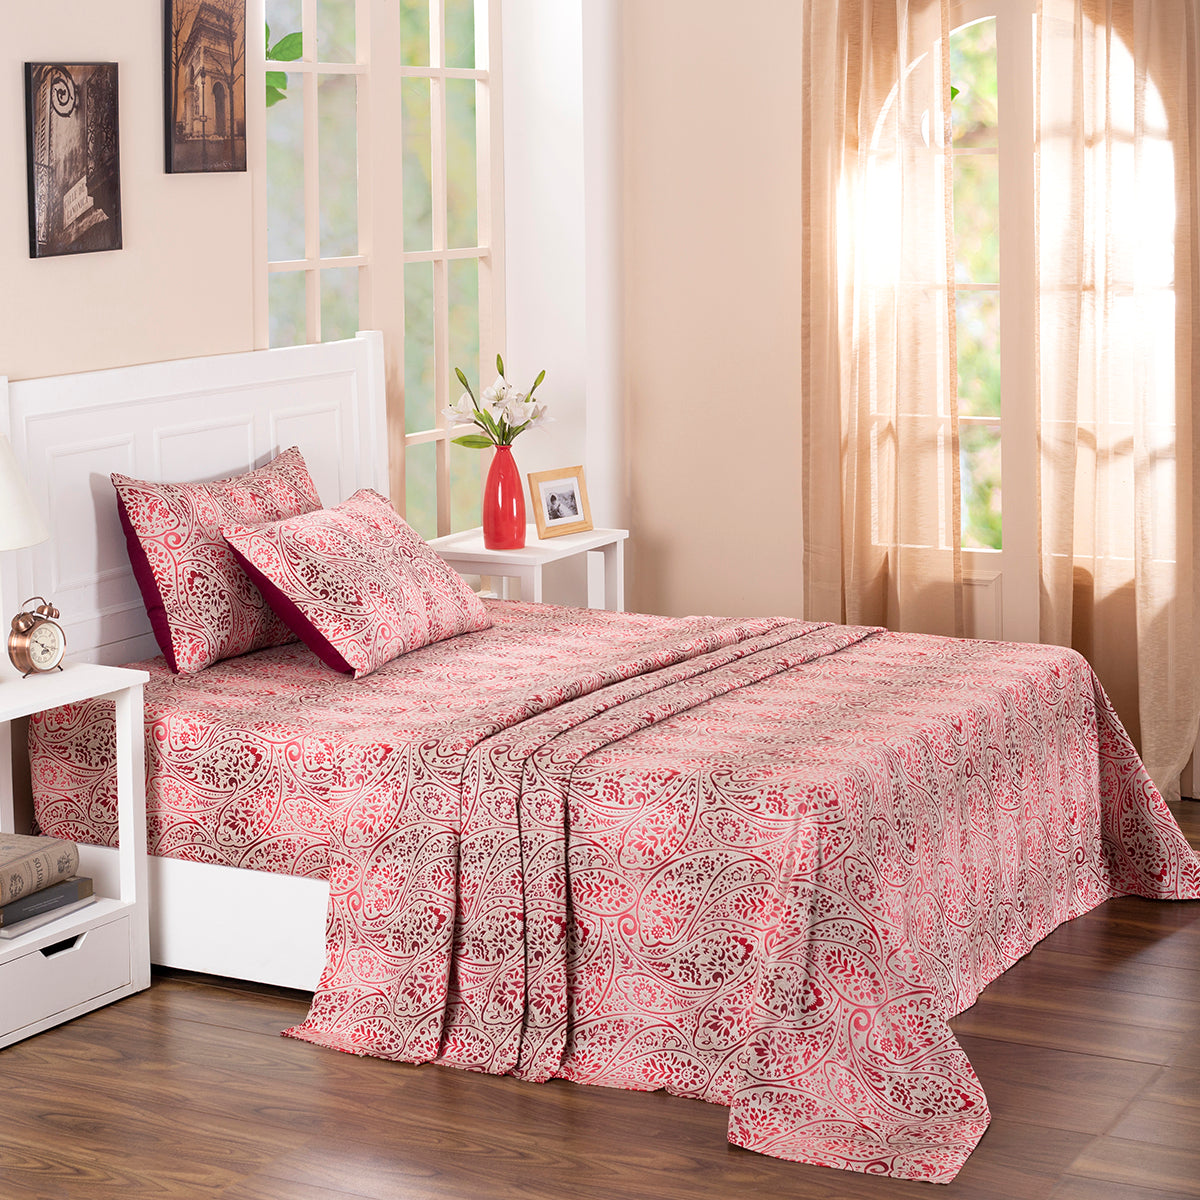 Folklore Transition Ombre Bonanza Printed 100% Cotton Red Ultra Soft Bed Sheet